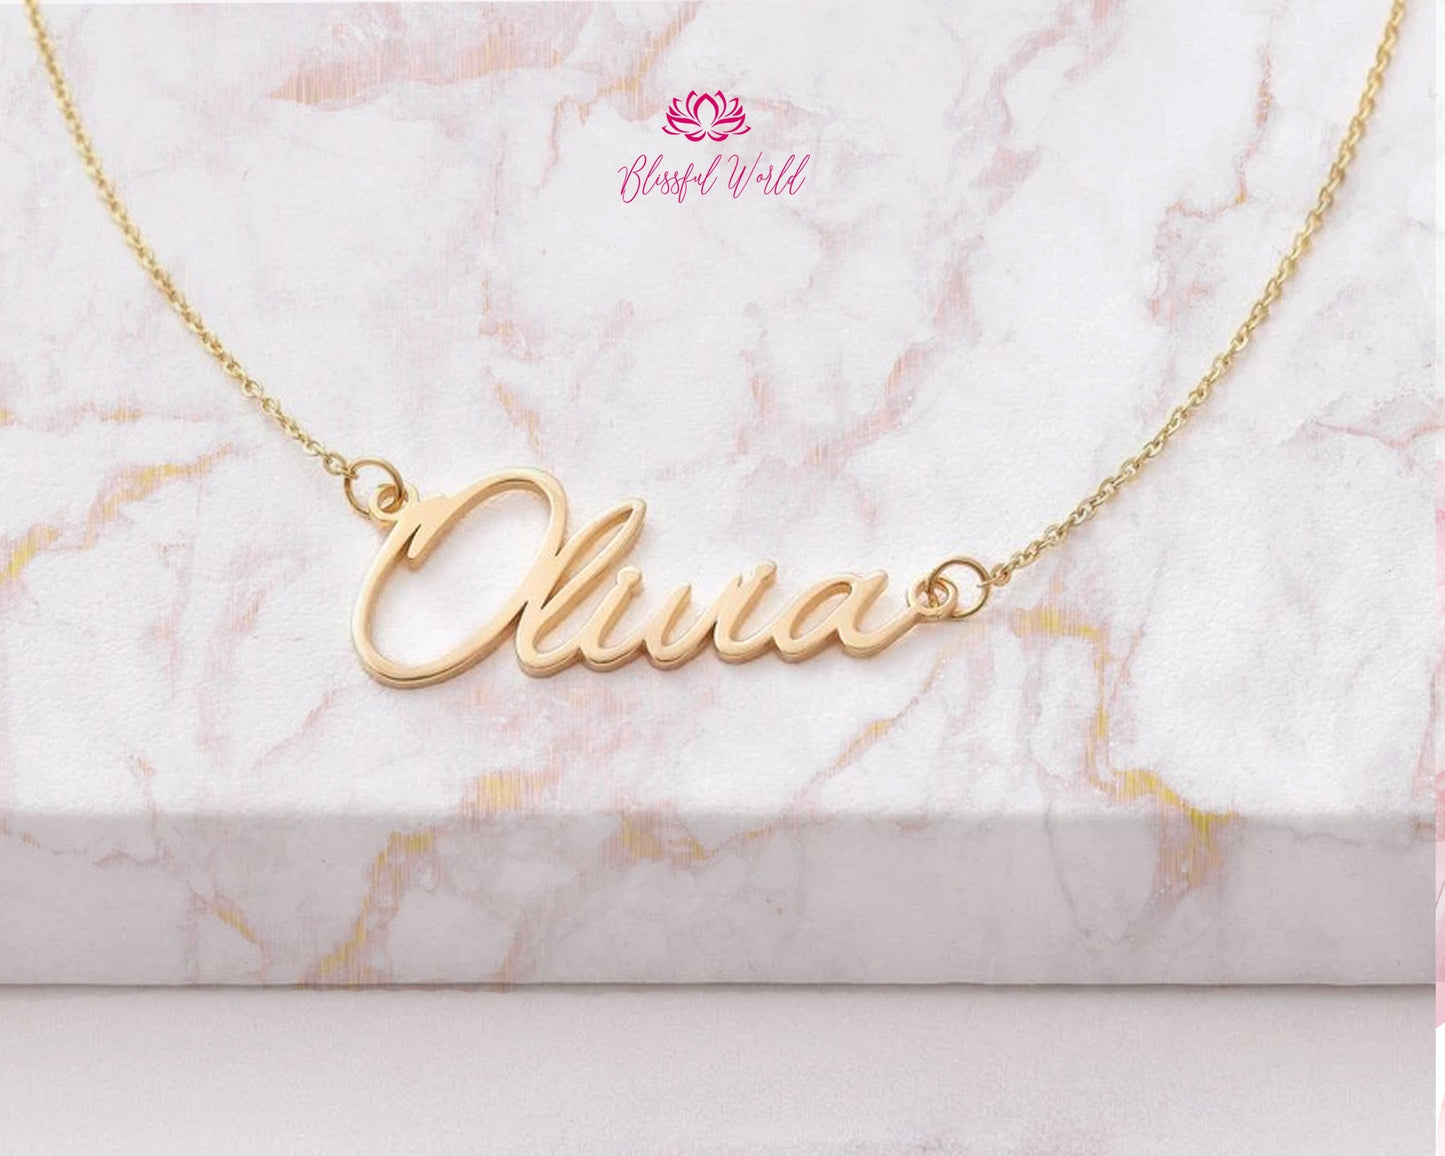 Custom Name Necklace with Box Chain in Gold, Silver, Rose Gold • Baby Name Necklace • Personalized Gift • Mothers Day Gift